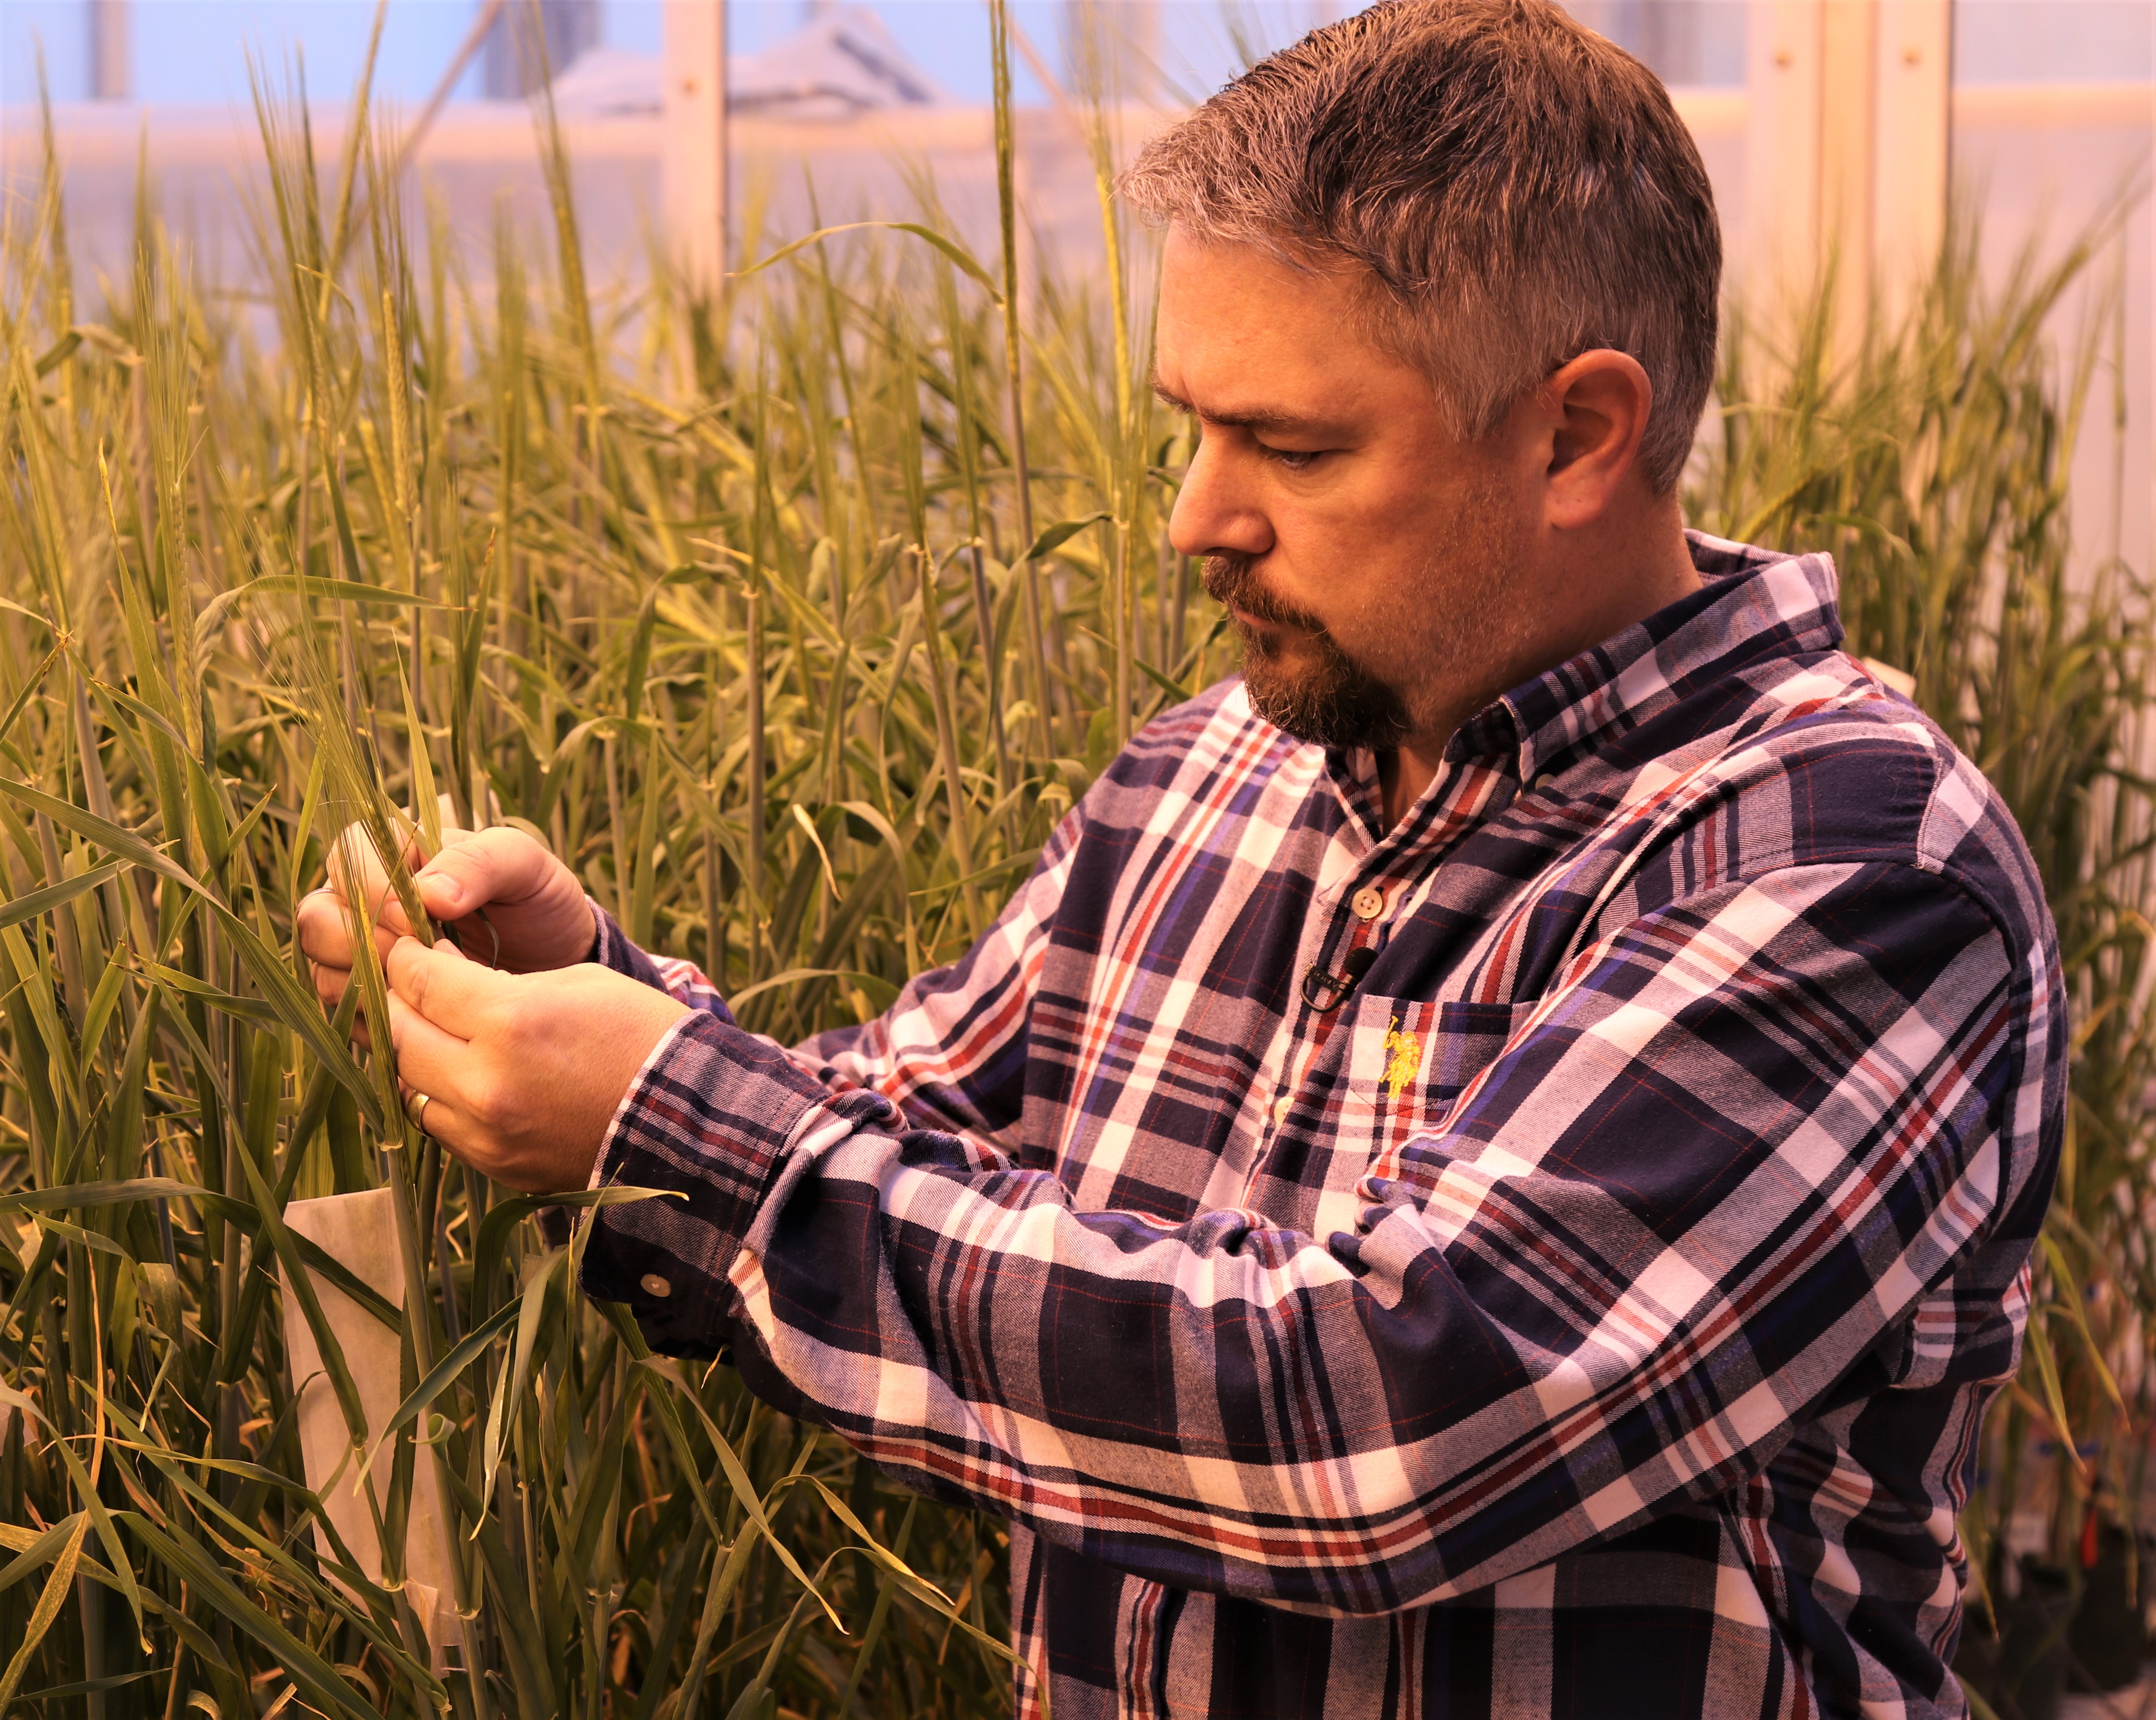 A researcher stands indoors in a greenhouse inspecting a wheat plant with his hands.